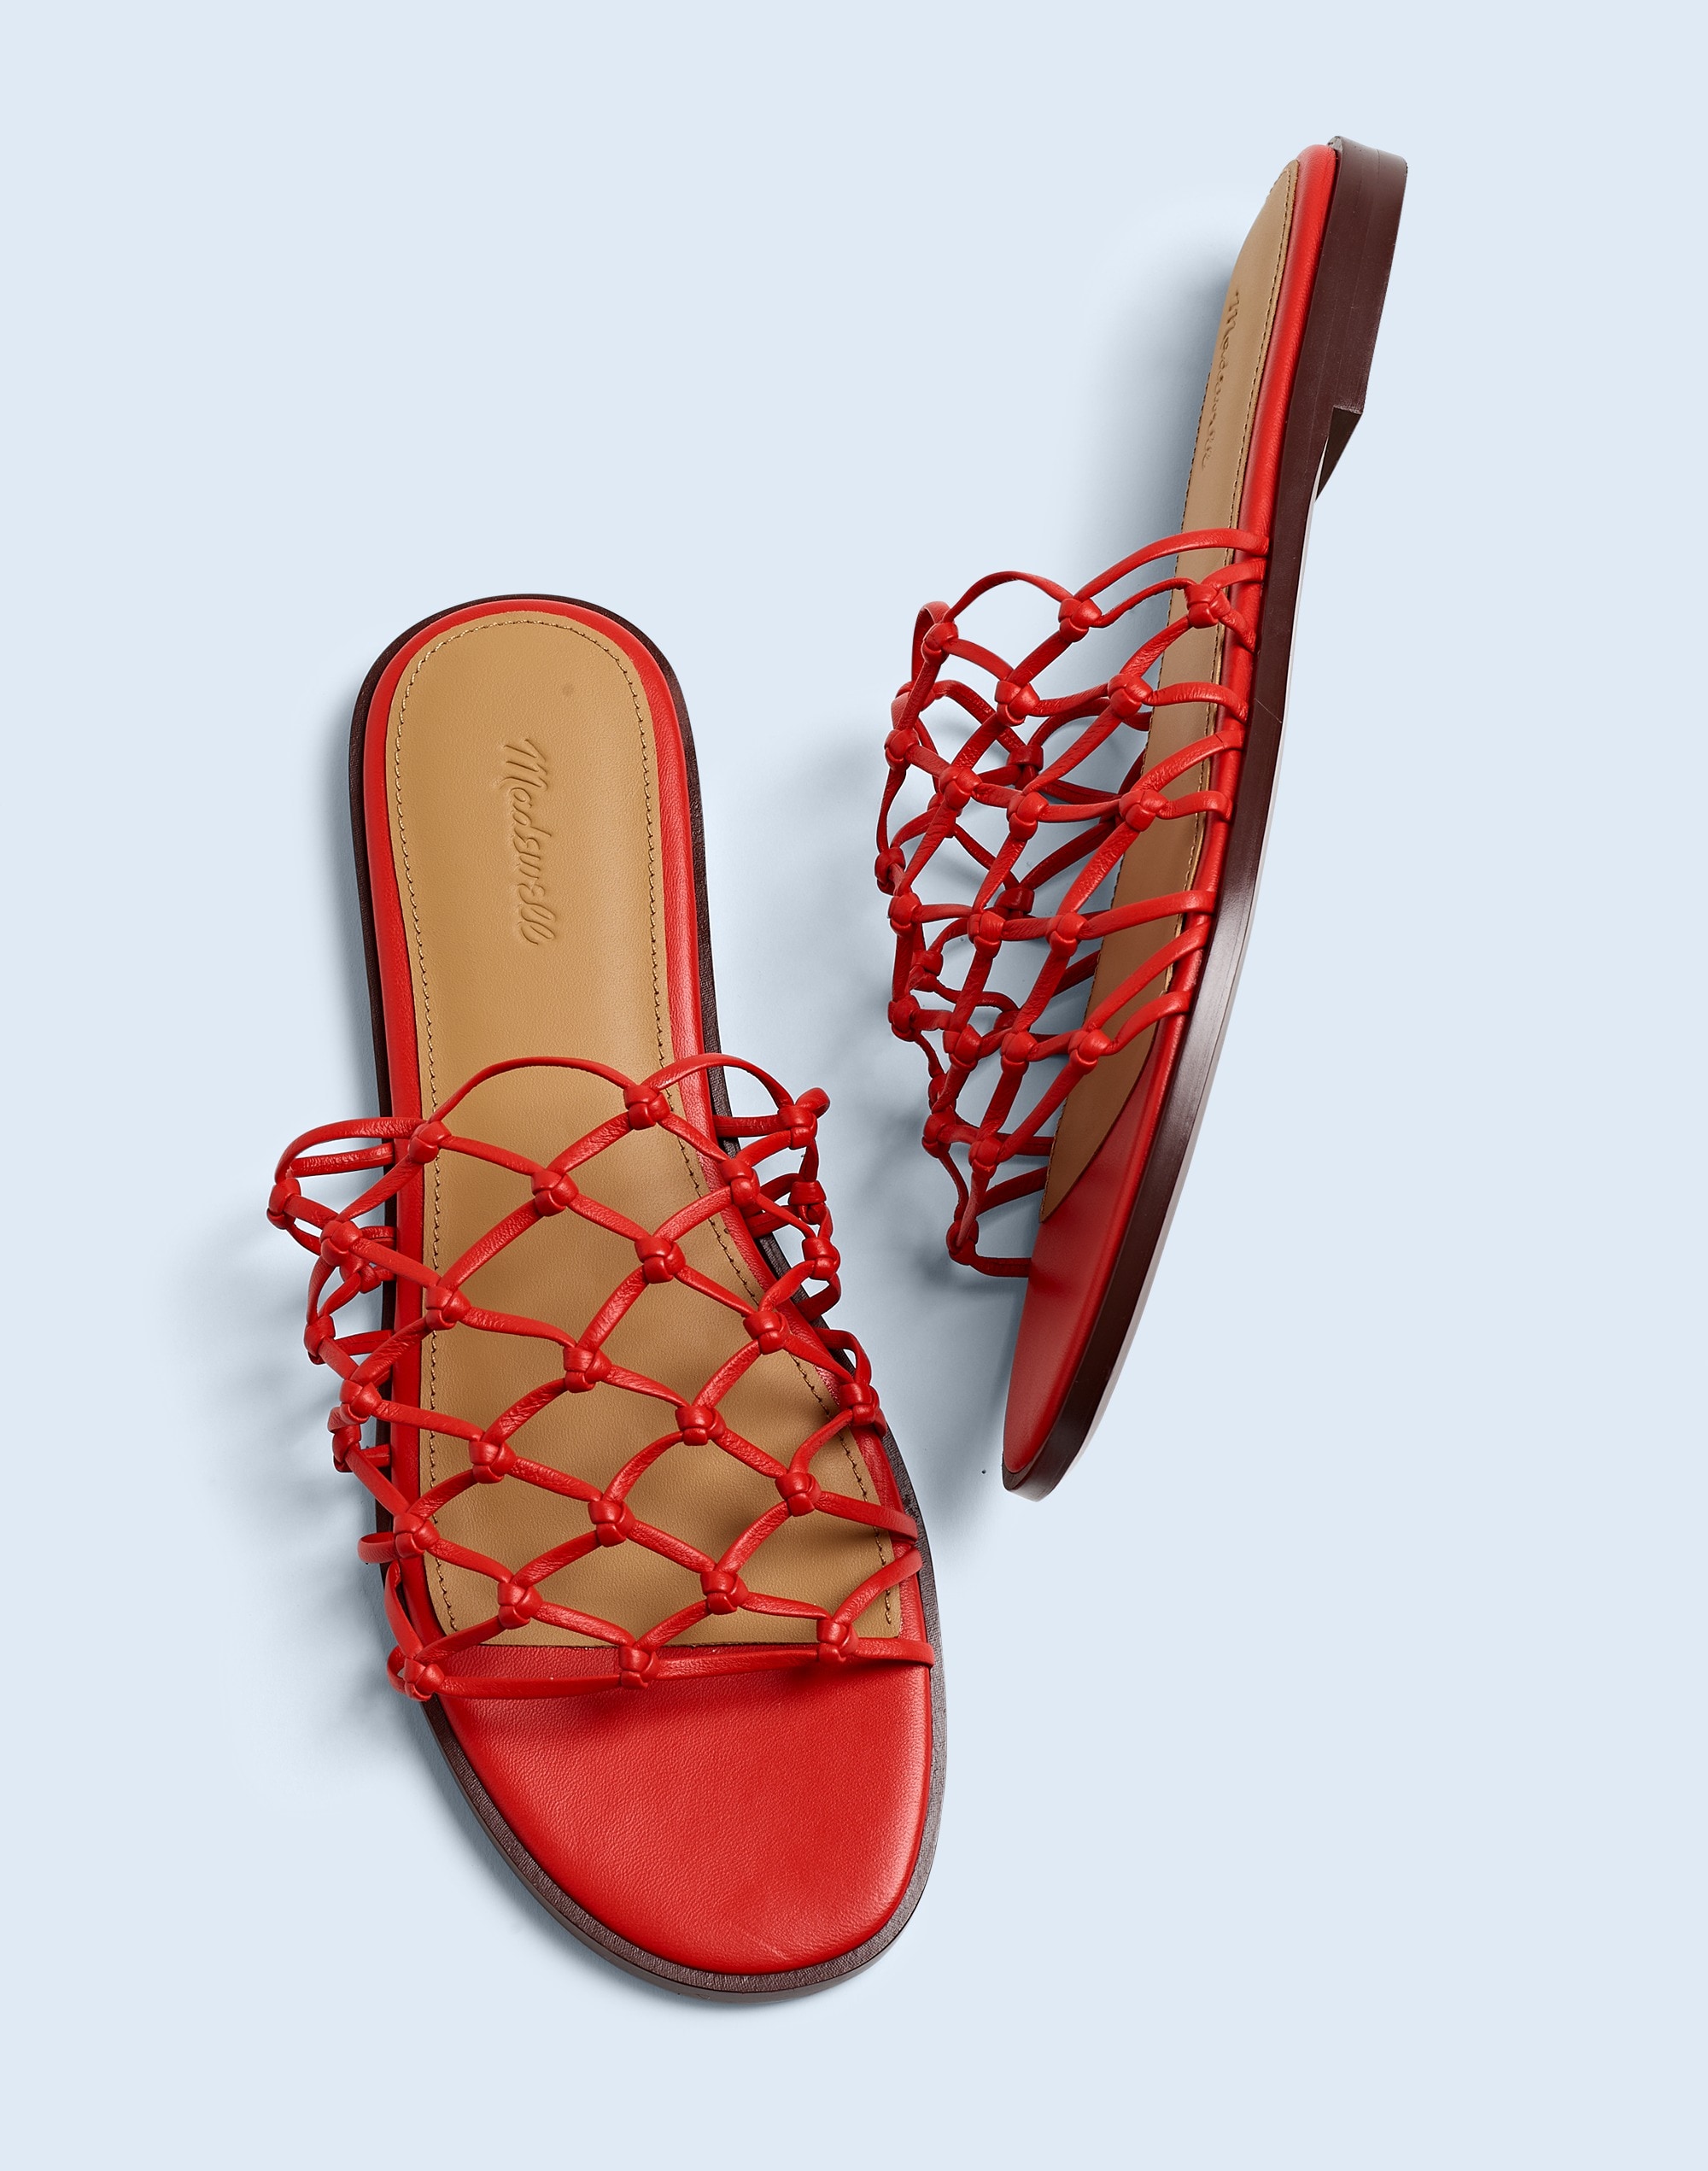 Mw The Danika Knotted Sandal In Red